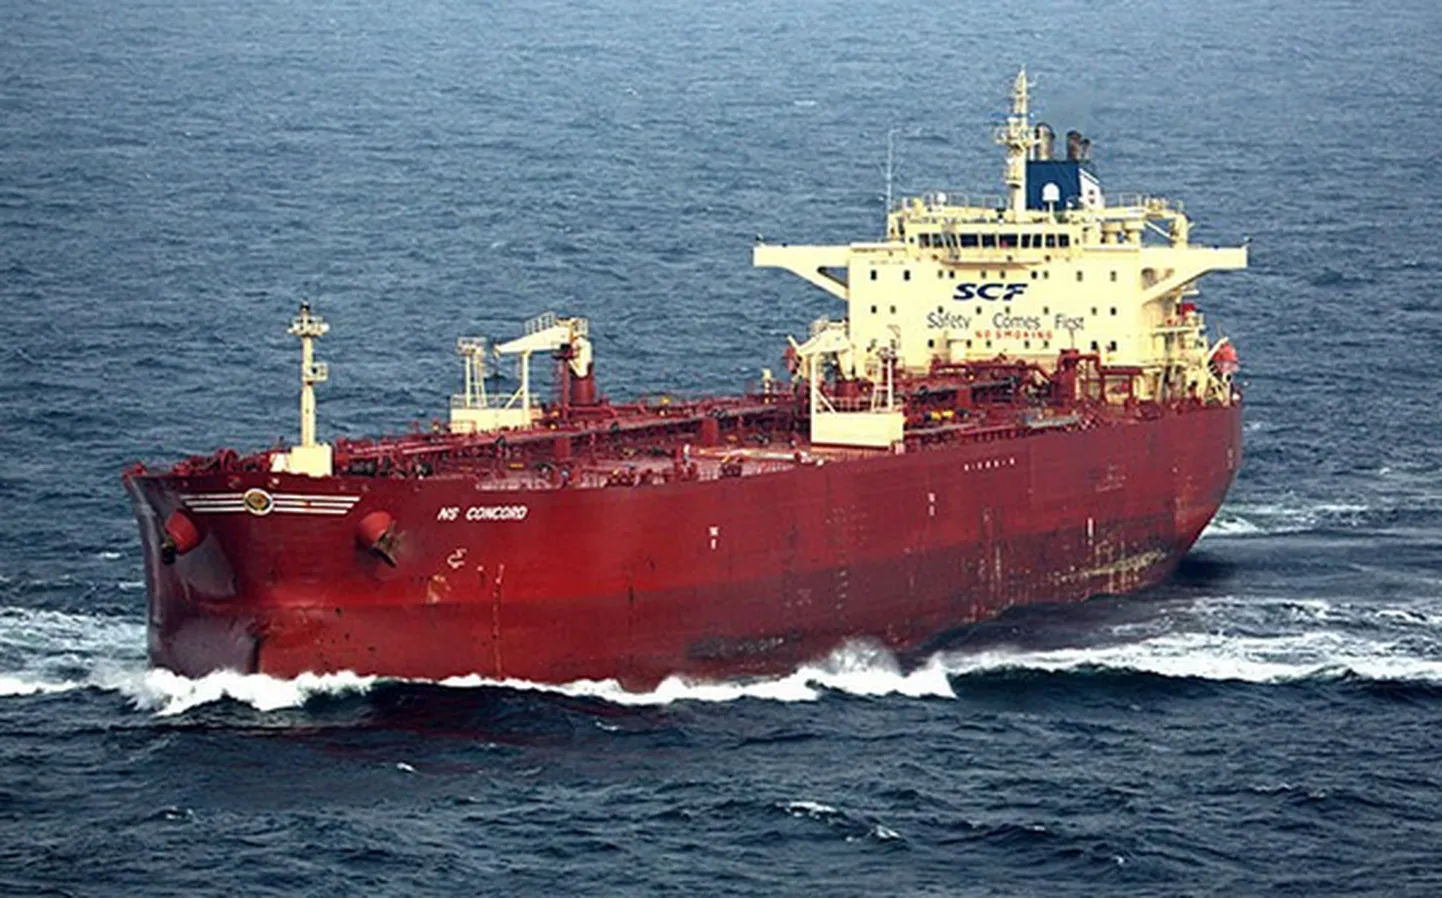 Tanker NS Concord.